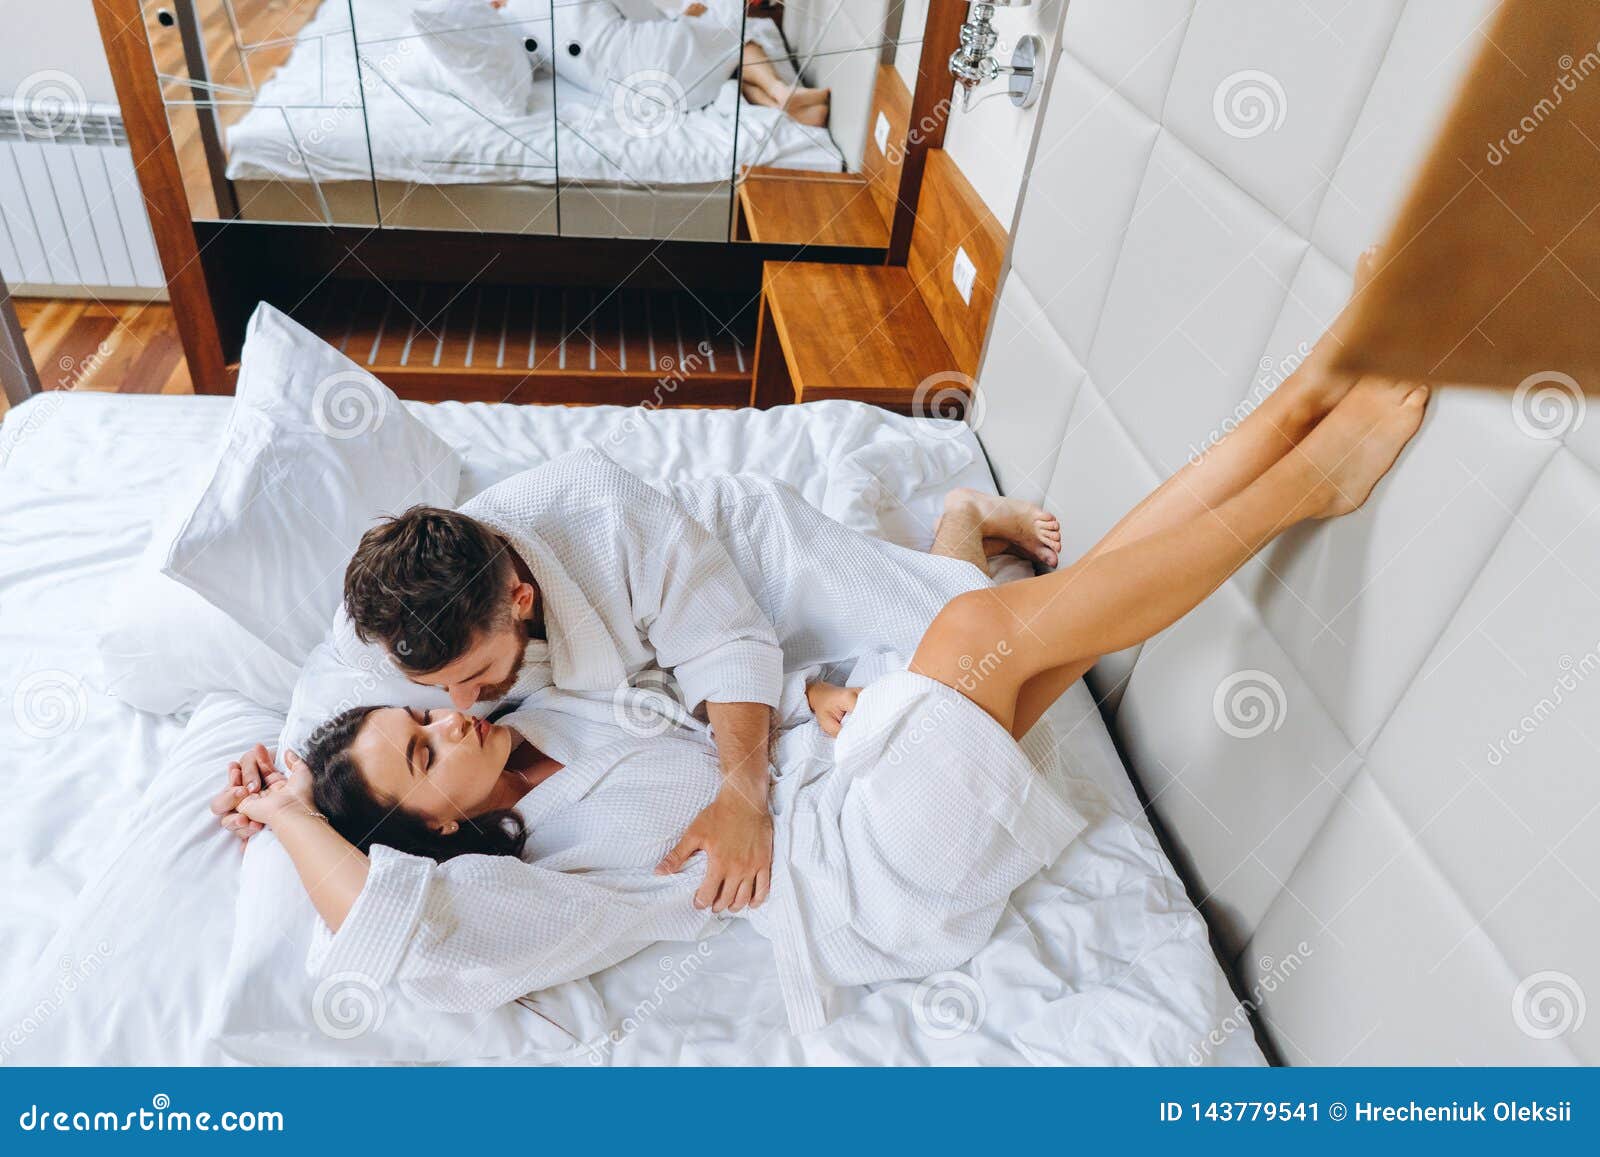 Picture Showing Happy Couple Resting In Hotel Room Stock Image Image